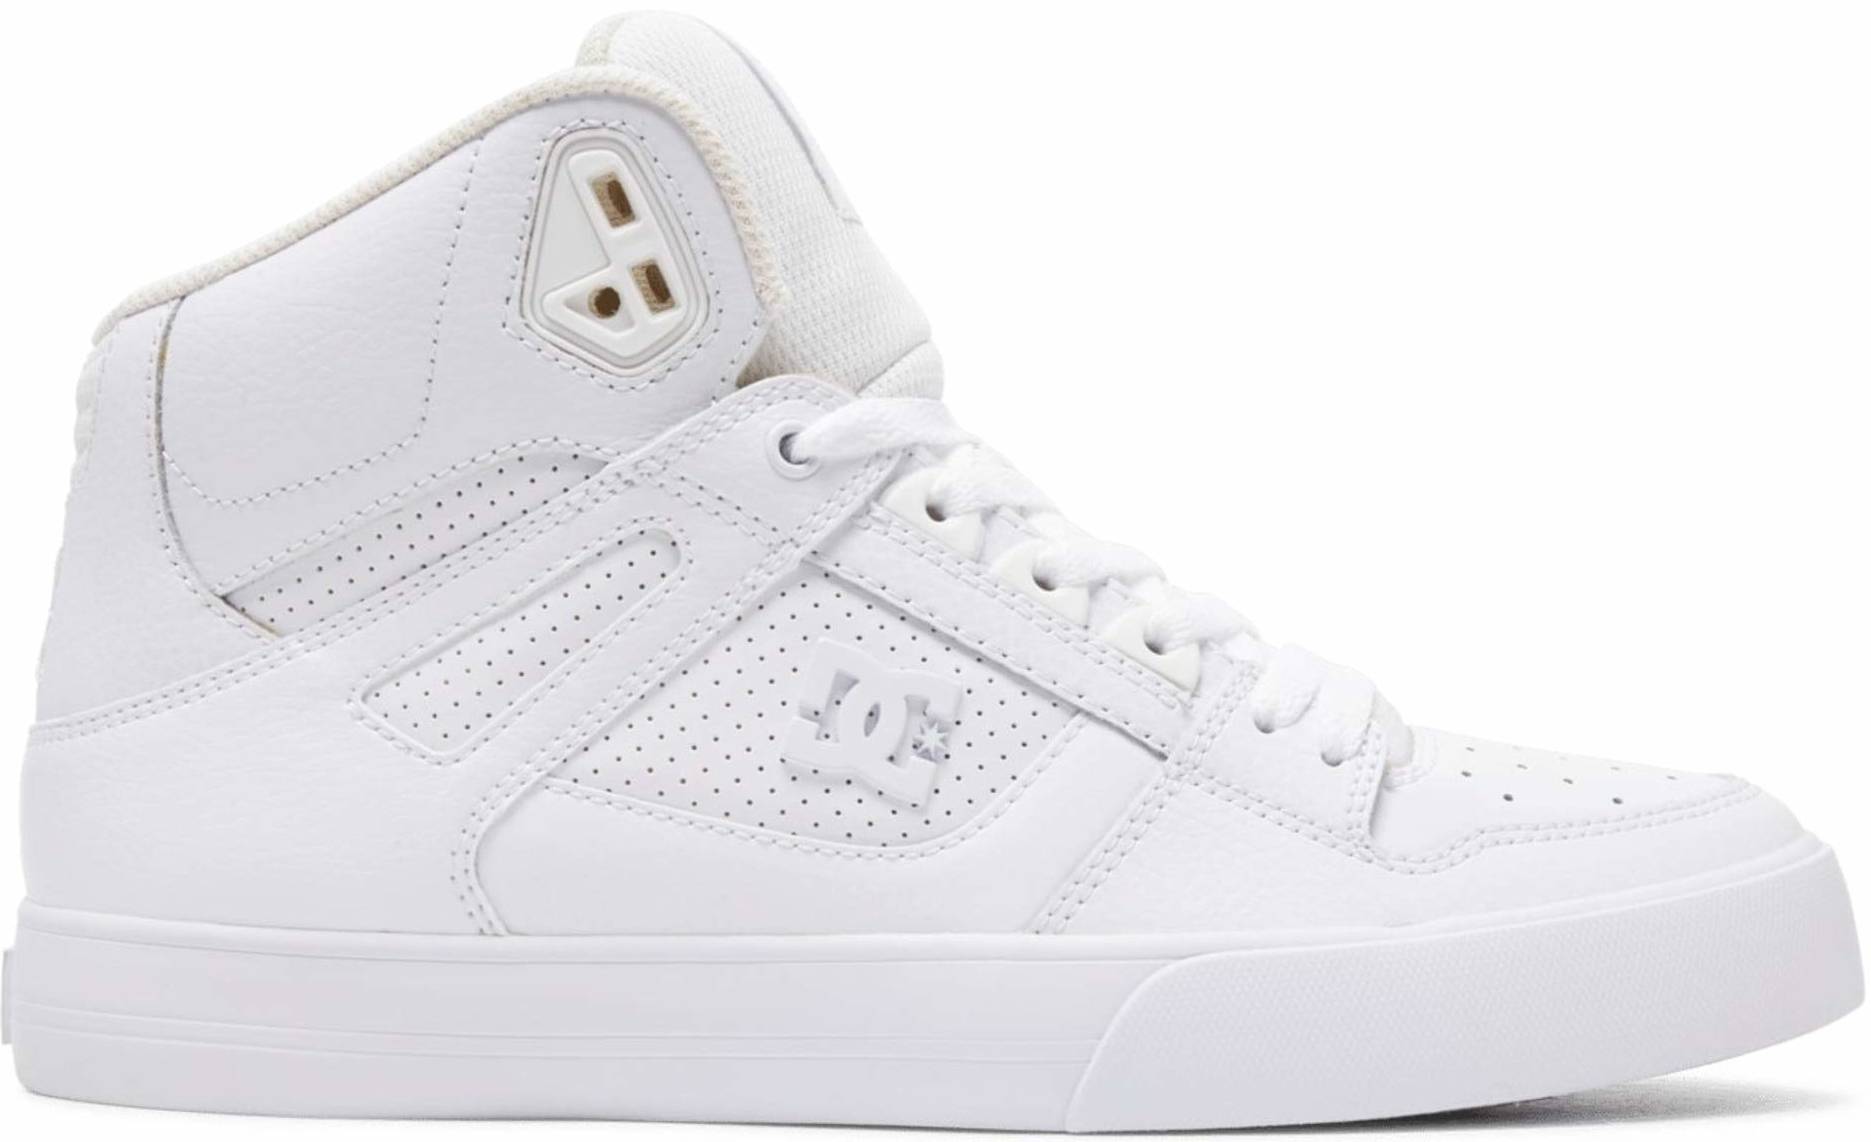 Only £44 + Review of DC Pure High-Top 